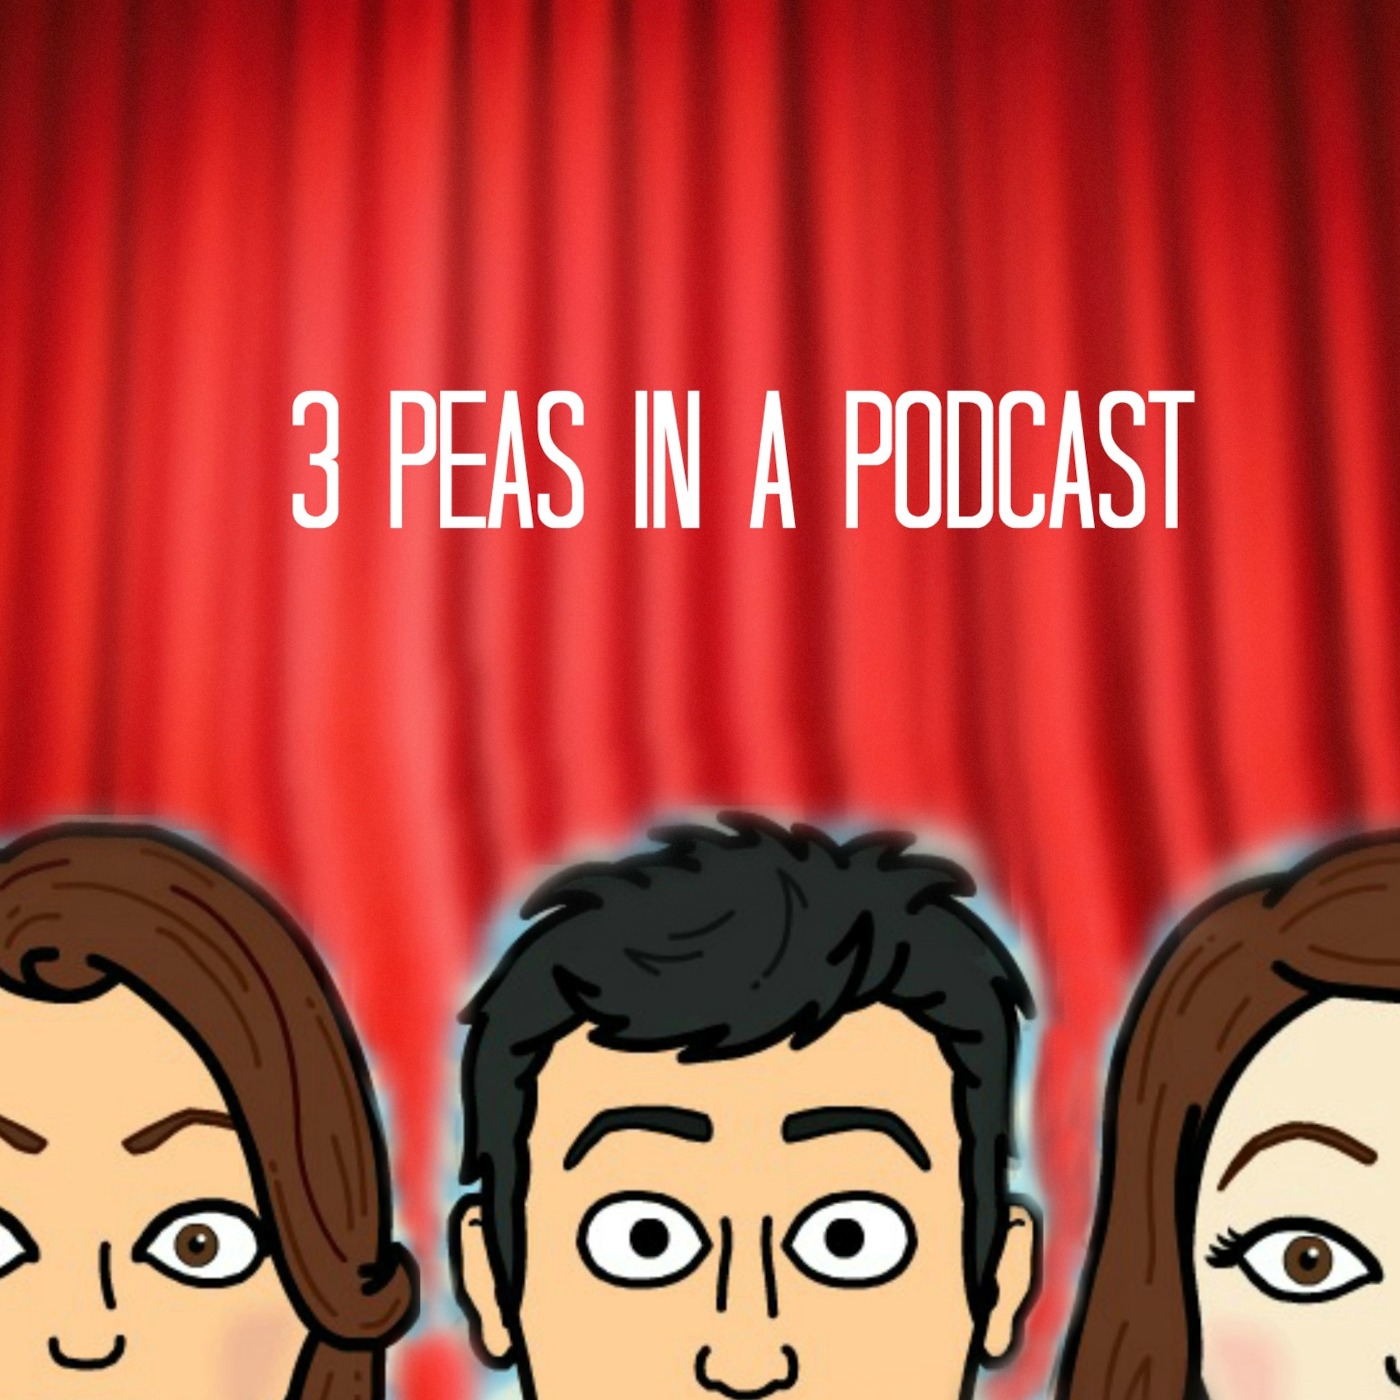 3 Peas In A Podcast